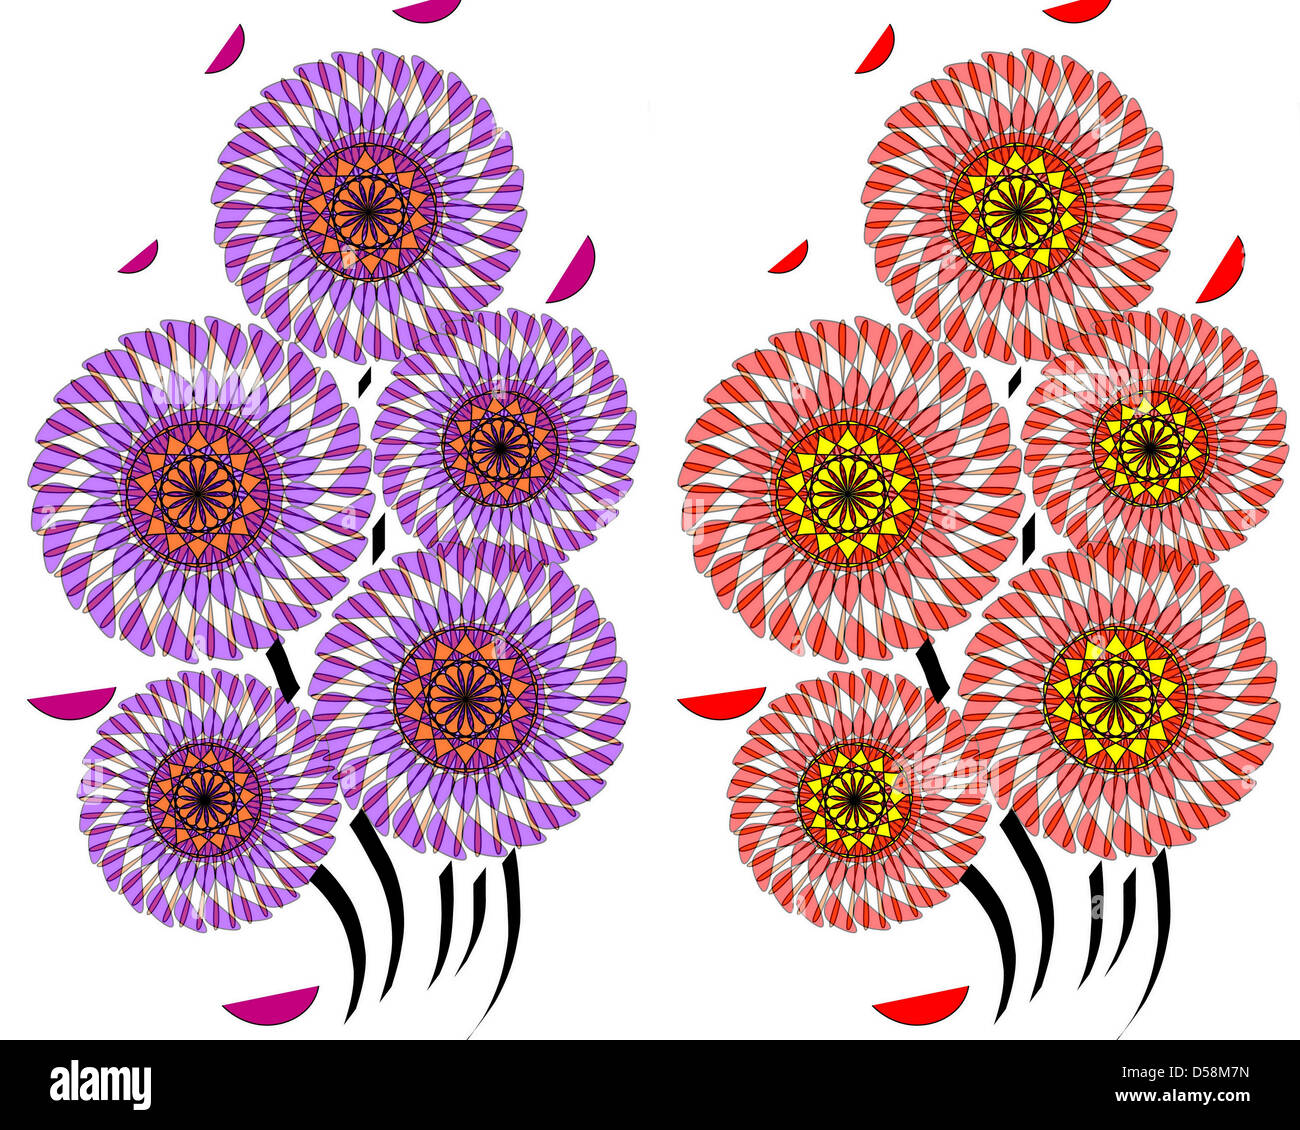 Modern abstract design with three flowers in red and purple with superimposed petals  in two picture illustration ideal for wallpapers and background. Stock Photo